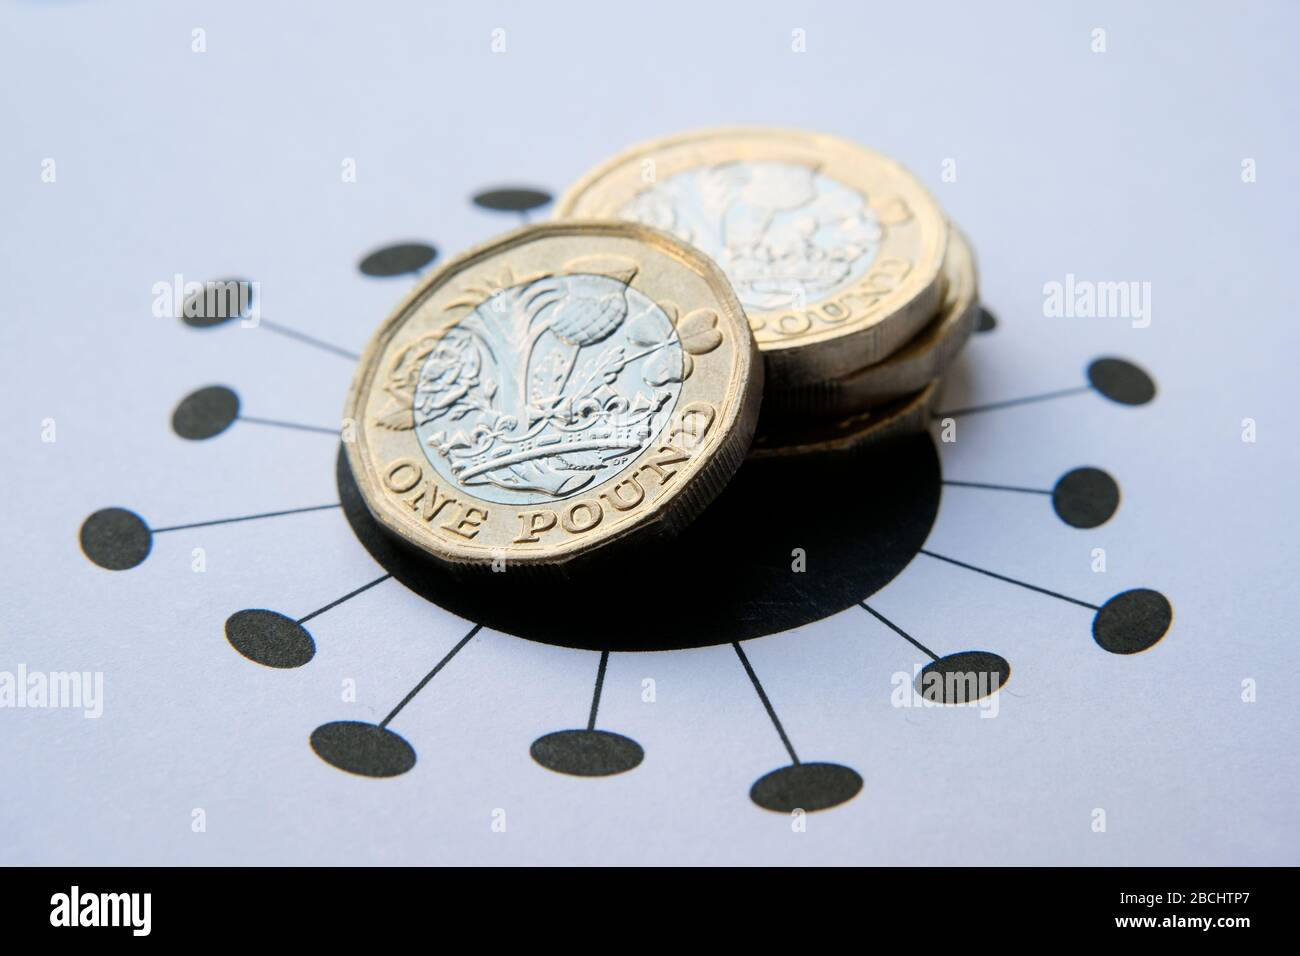 One pound coins placed on top of Coronavirus COVID-19 printed illustration. Concept photo for economy impact of pandemic and quarantine. Stock Photo